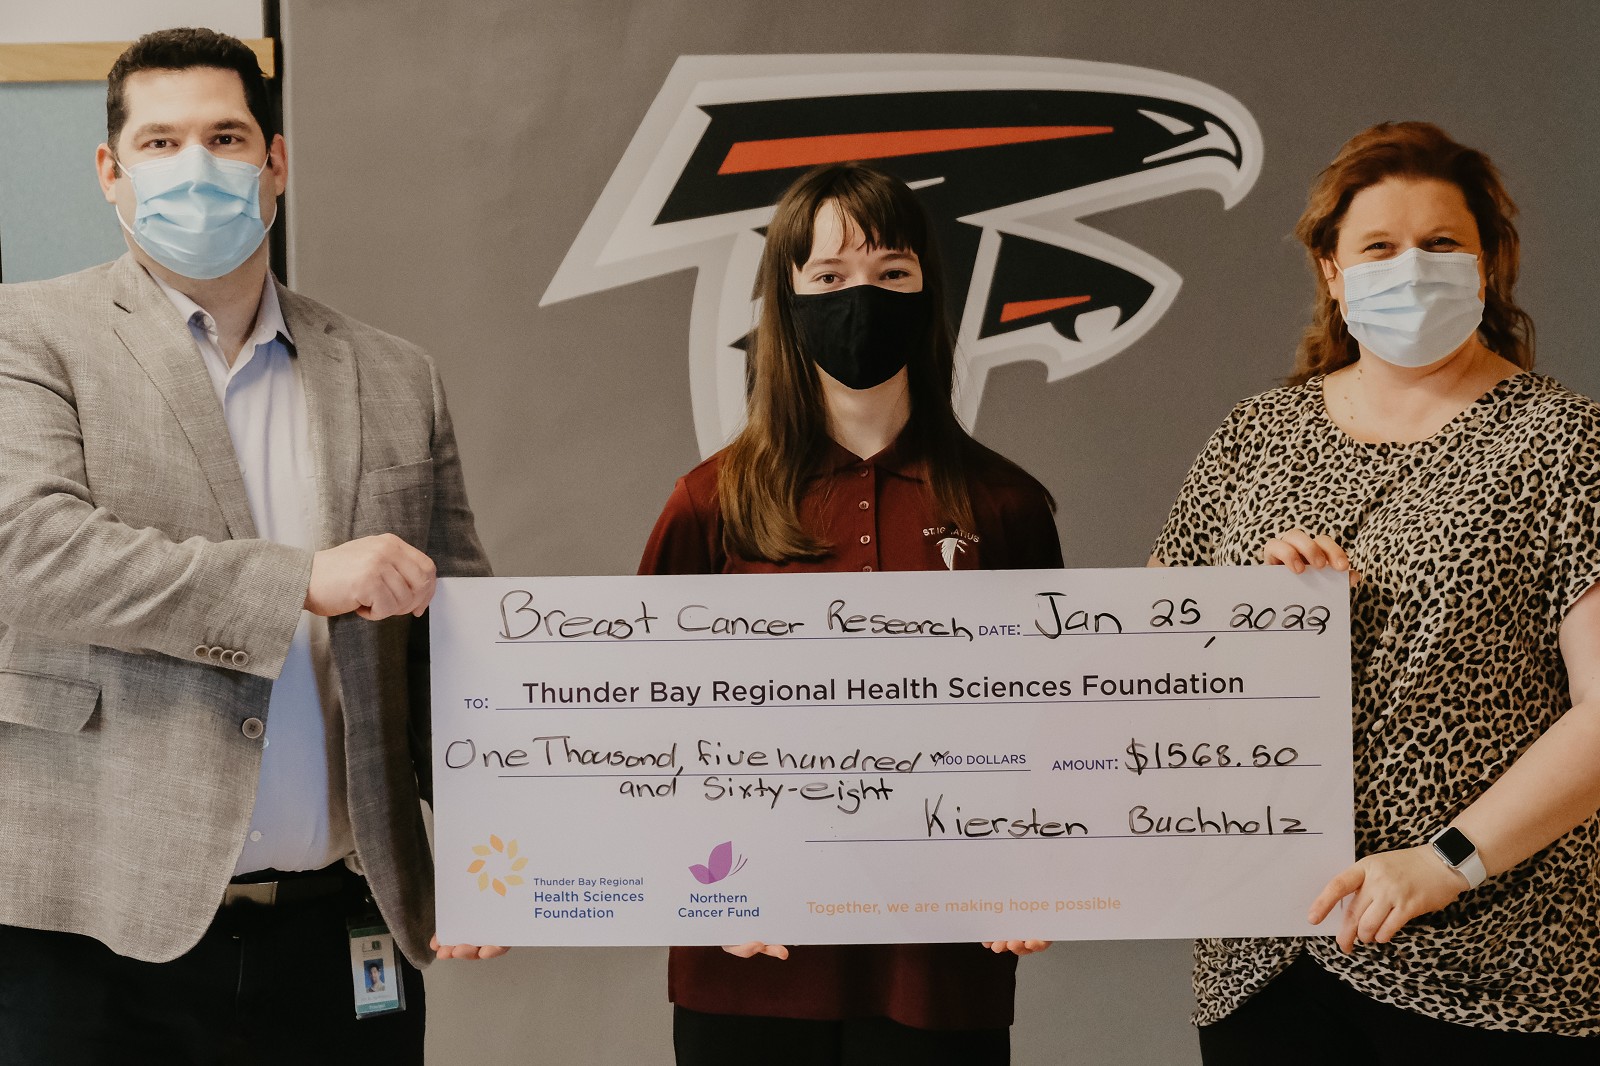 Local student raises $1568.50 for Breast Cancer Research